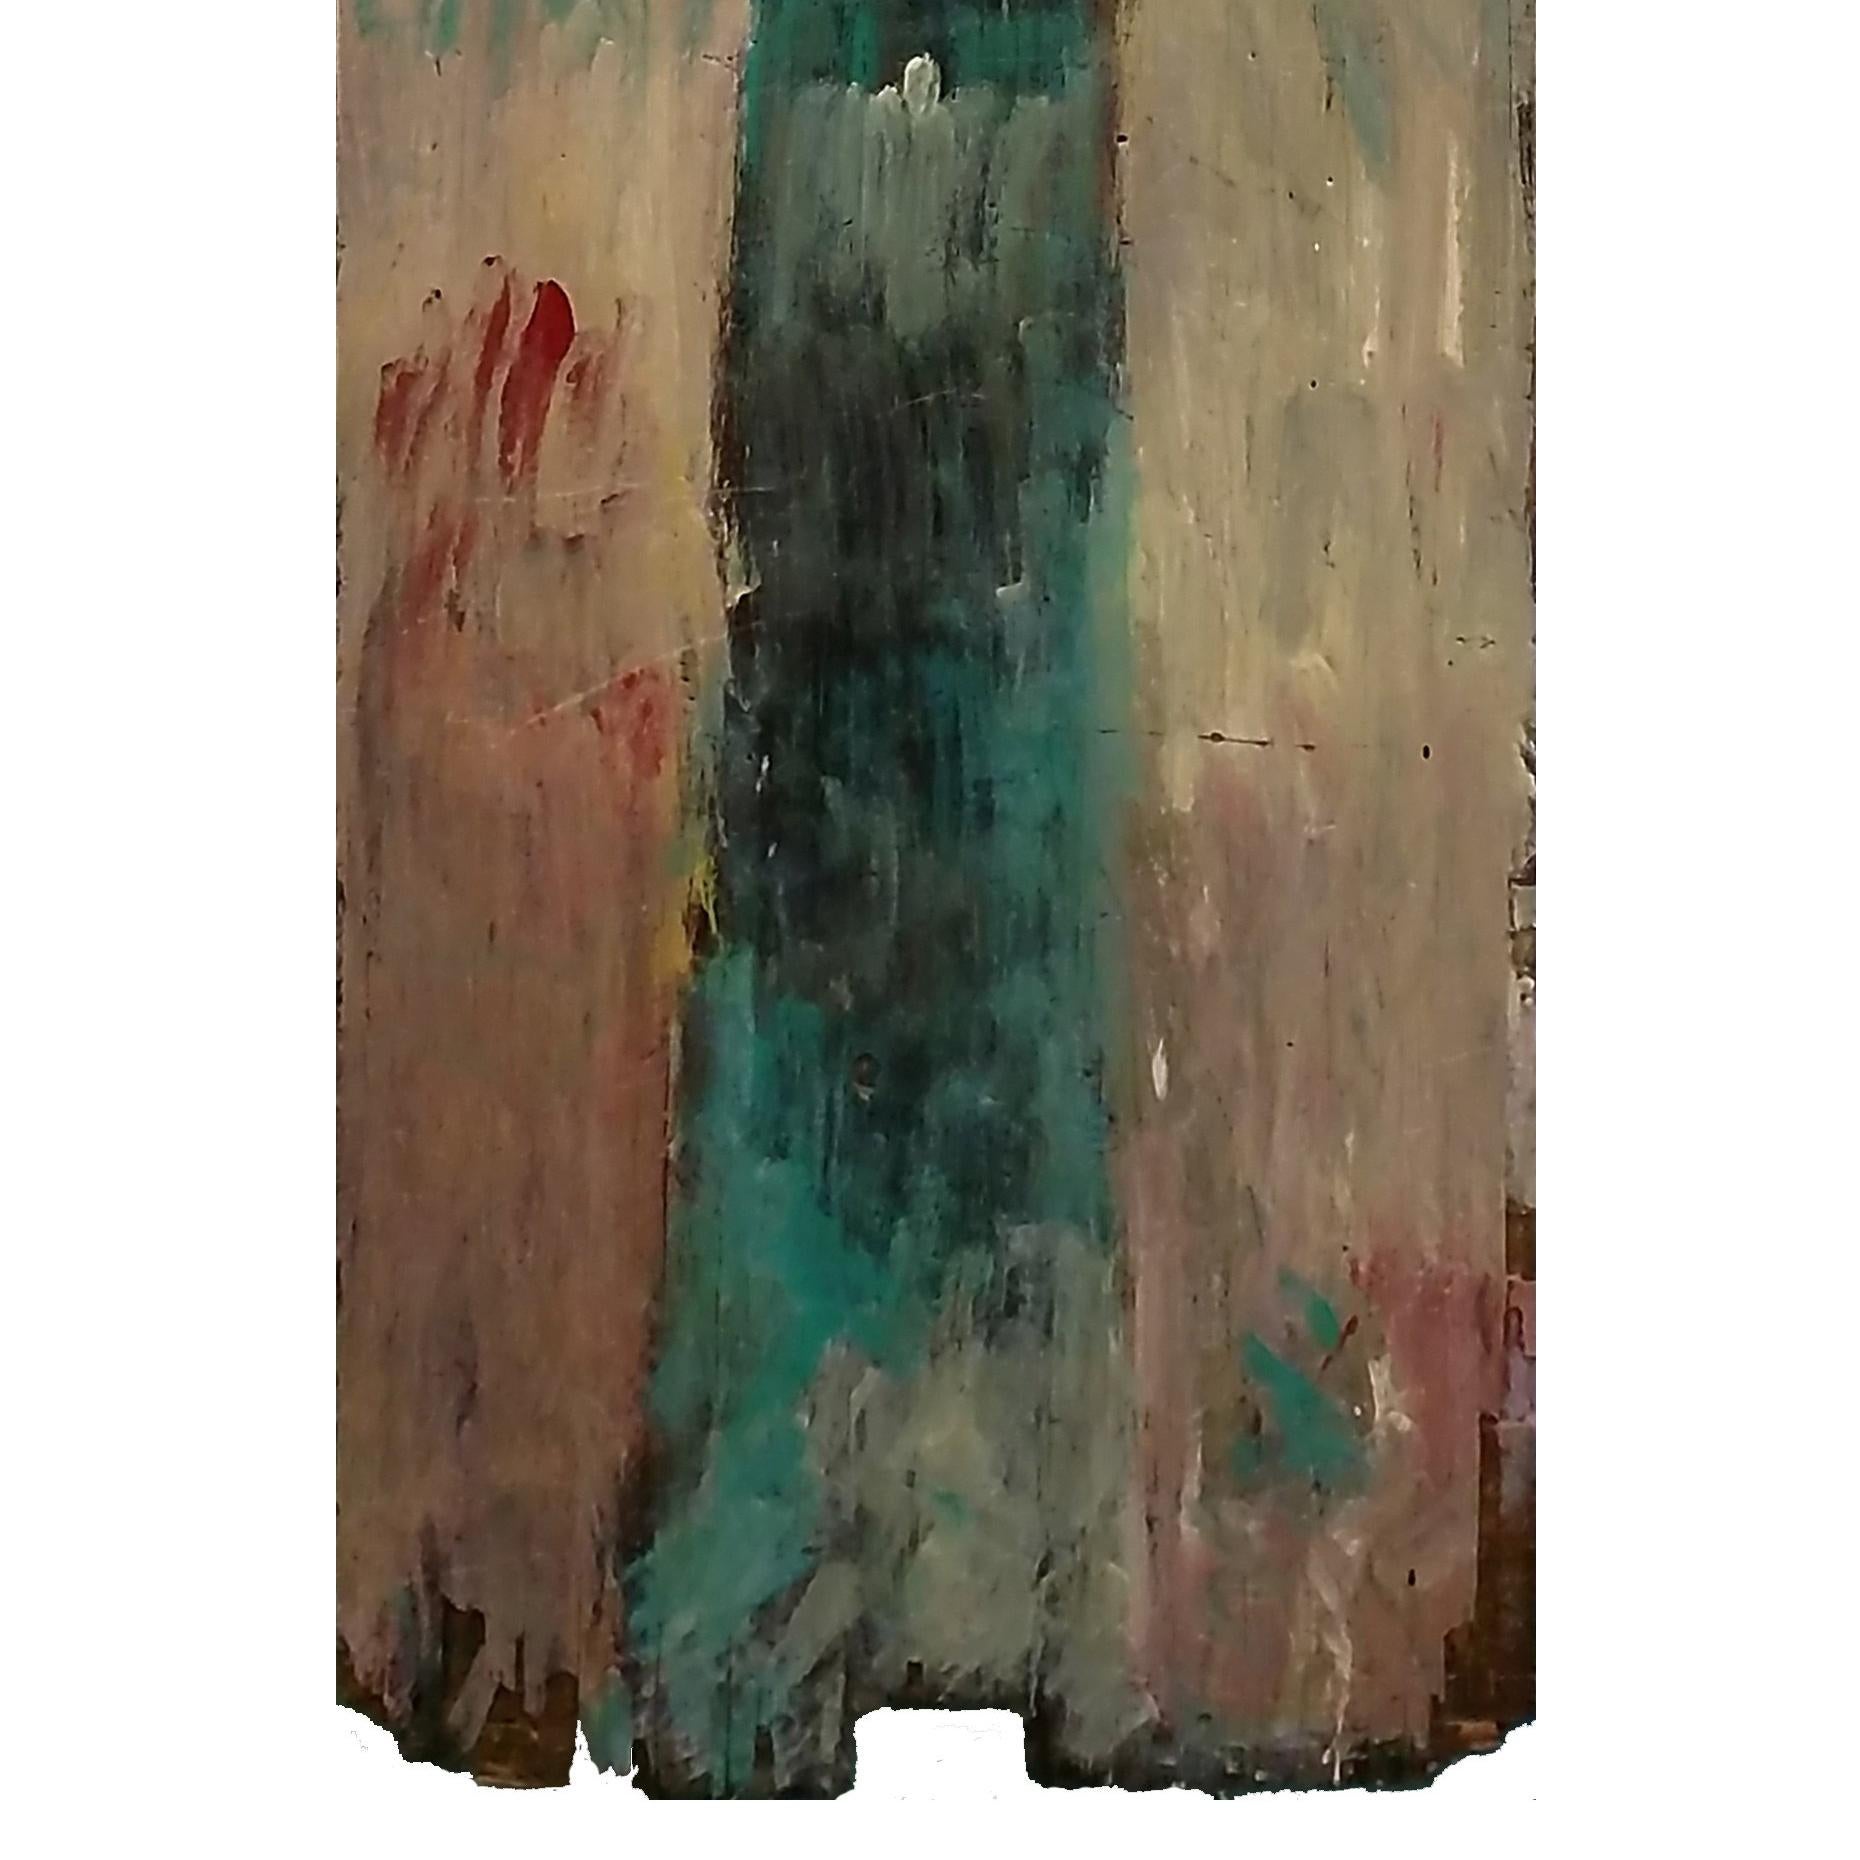 THE TOWER (PAINTING ON WOOD) - Outsider Art Painting by Purvis Young